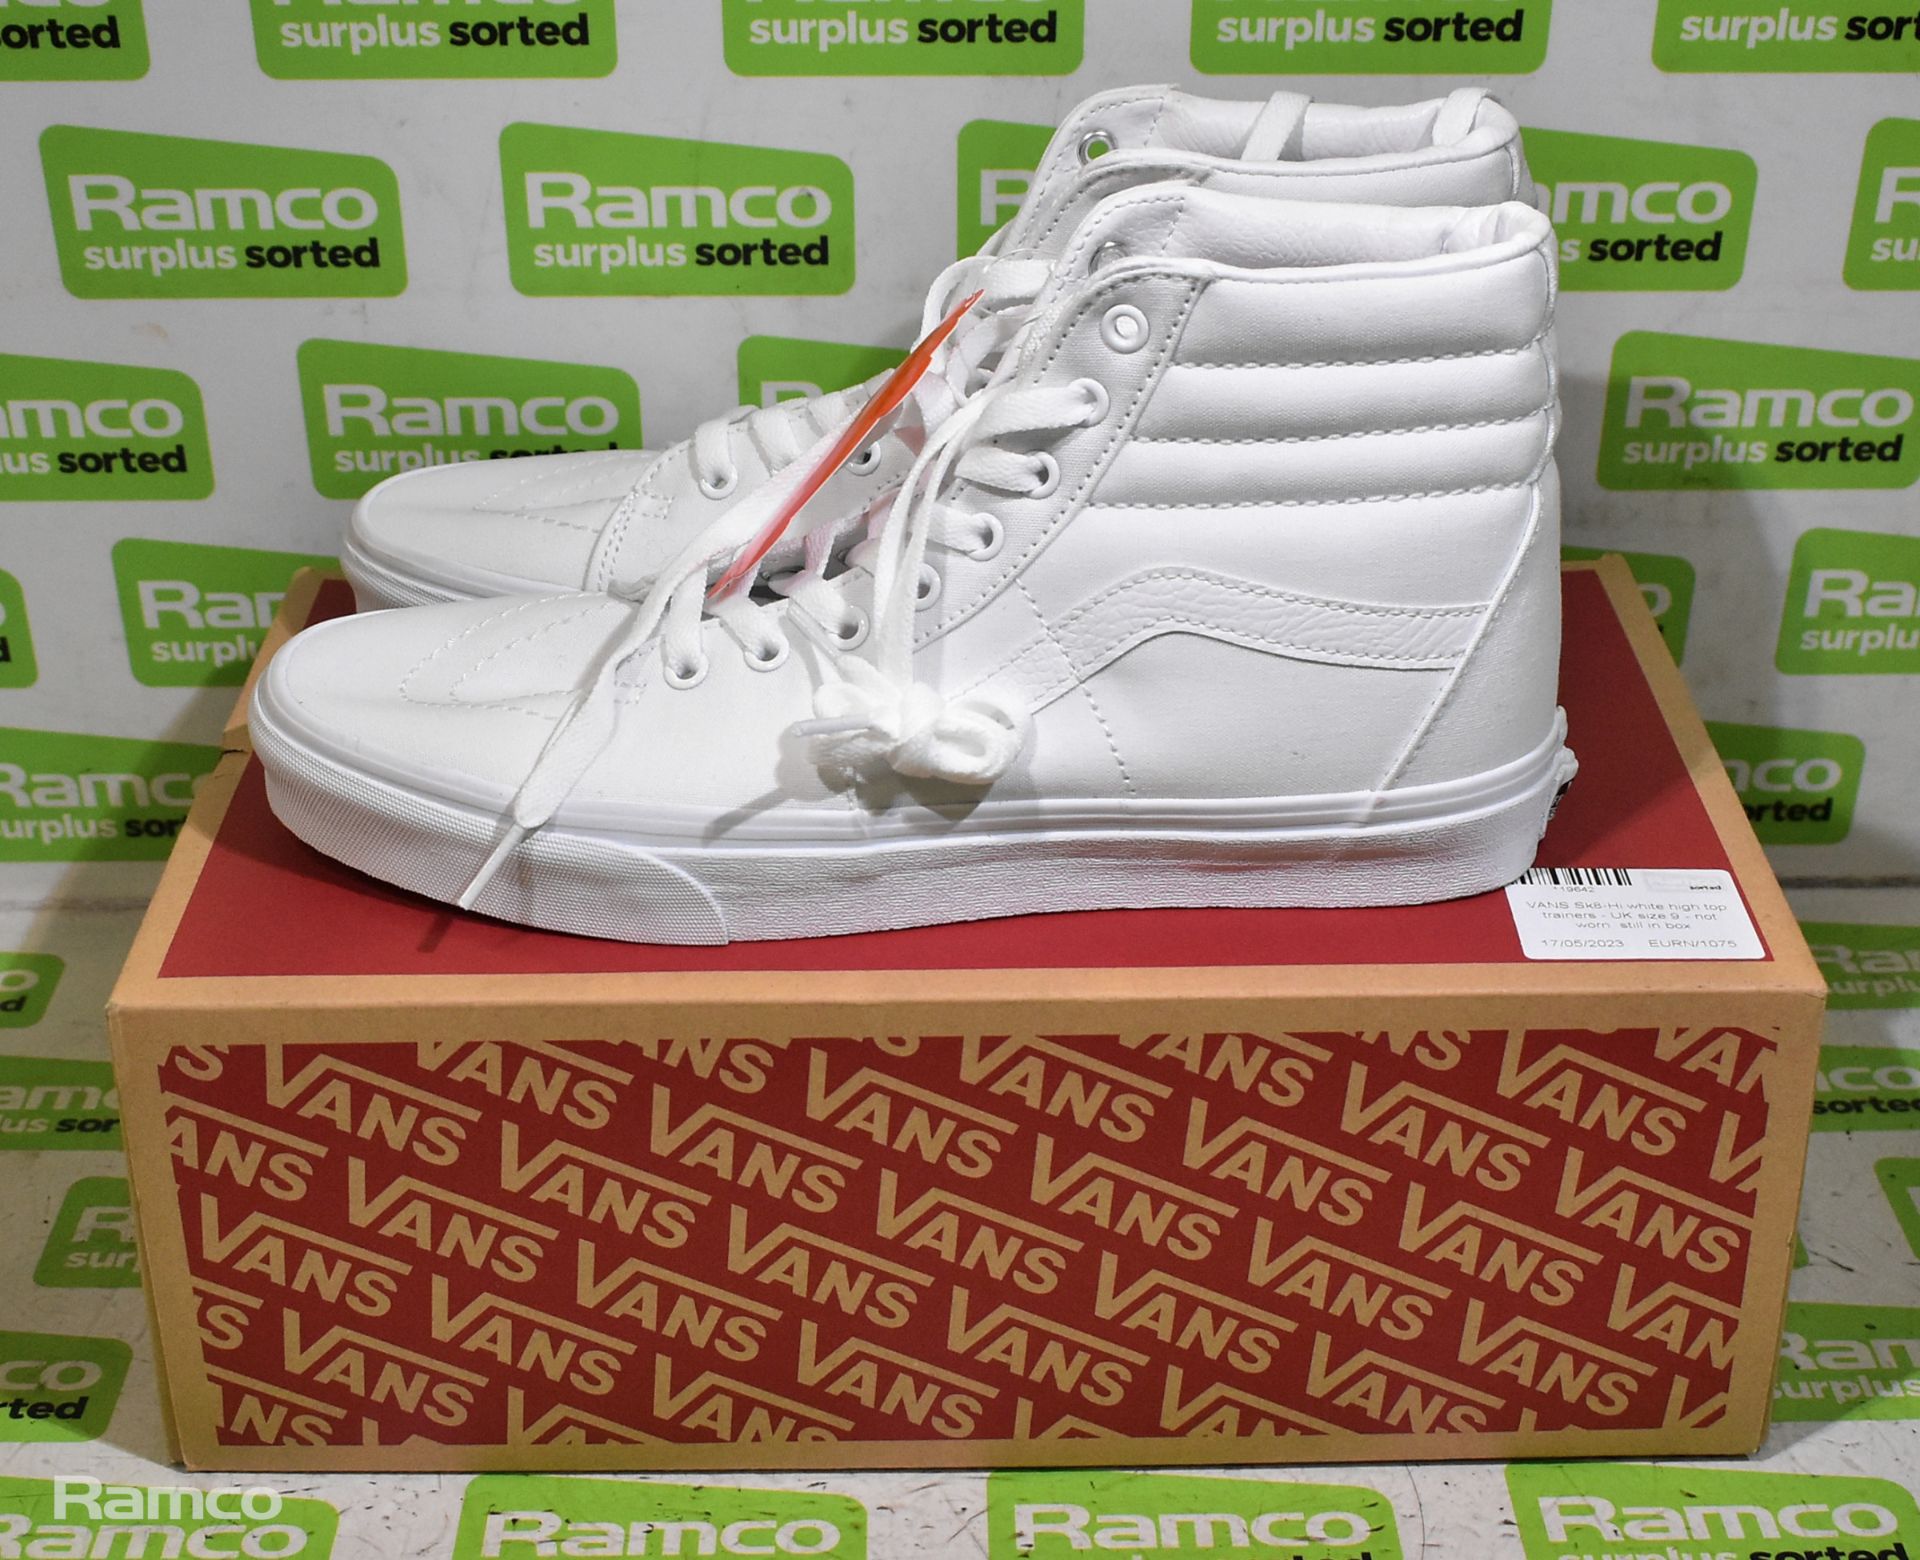 VANS Sk8-Hi white high top trainers - UK size 9 - not worn, still in box